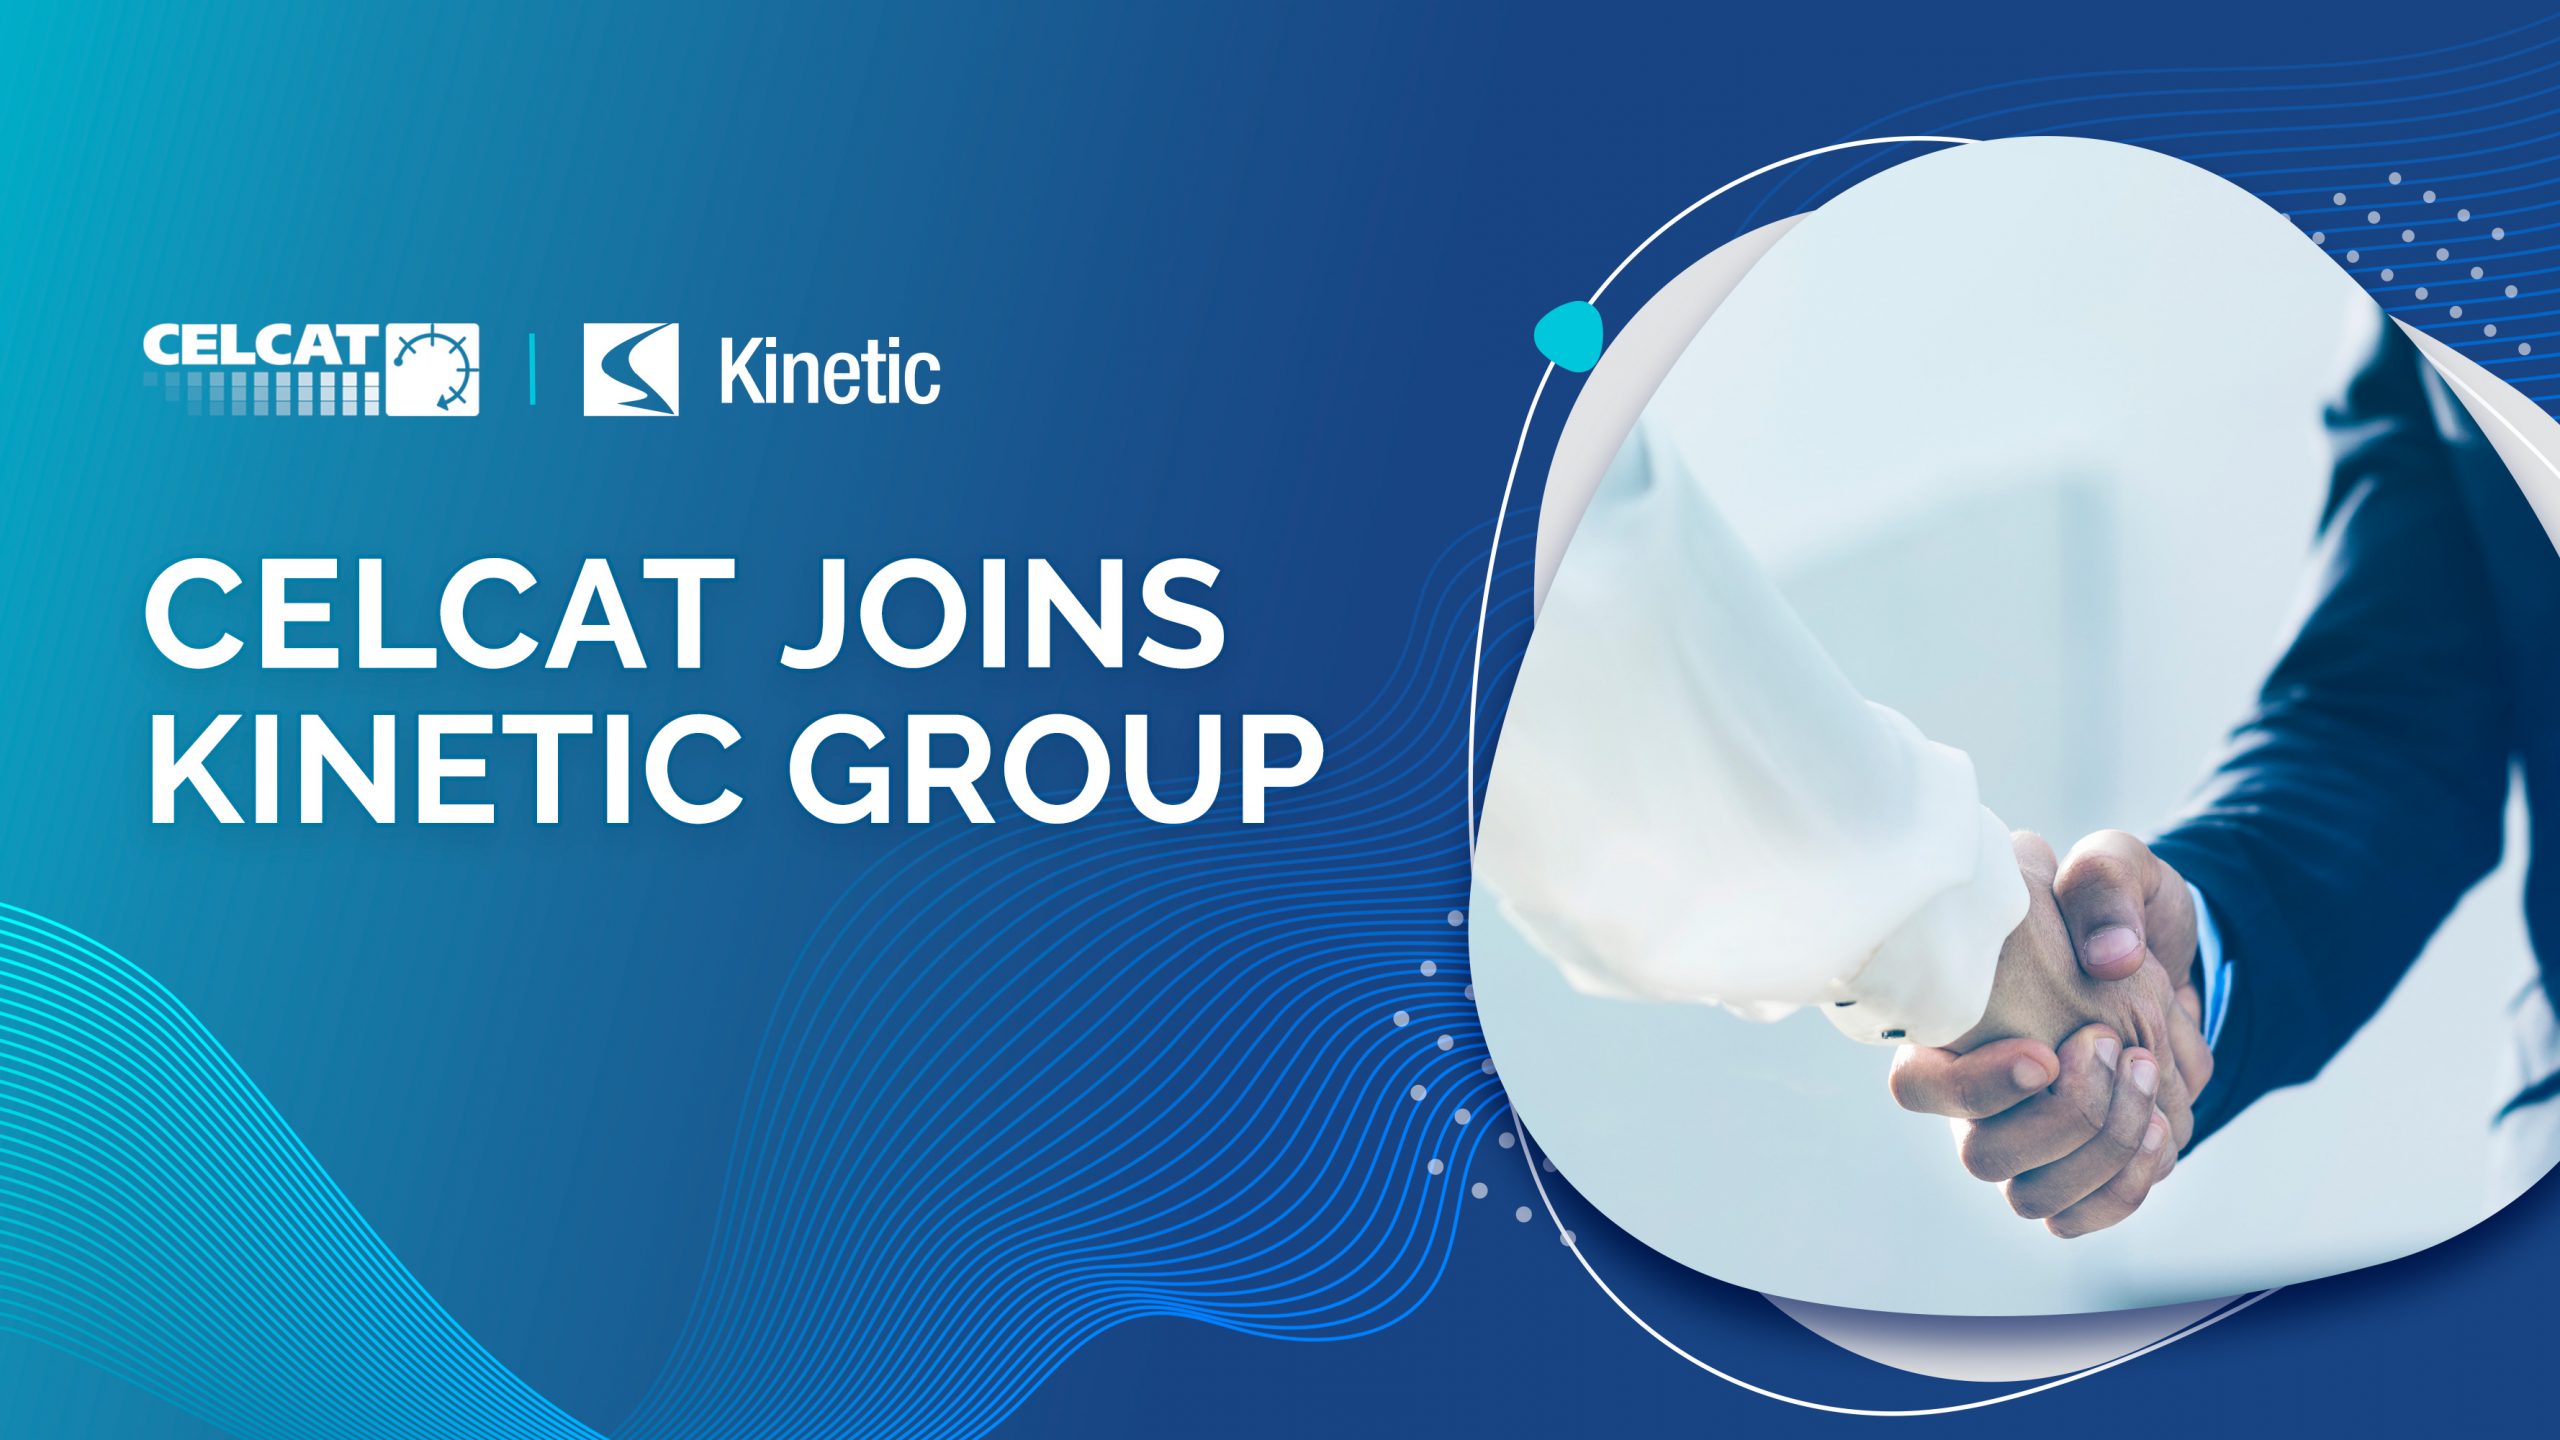 CELCAT joins Kinetic 2